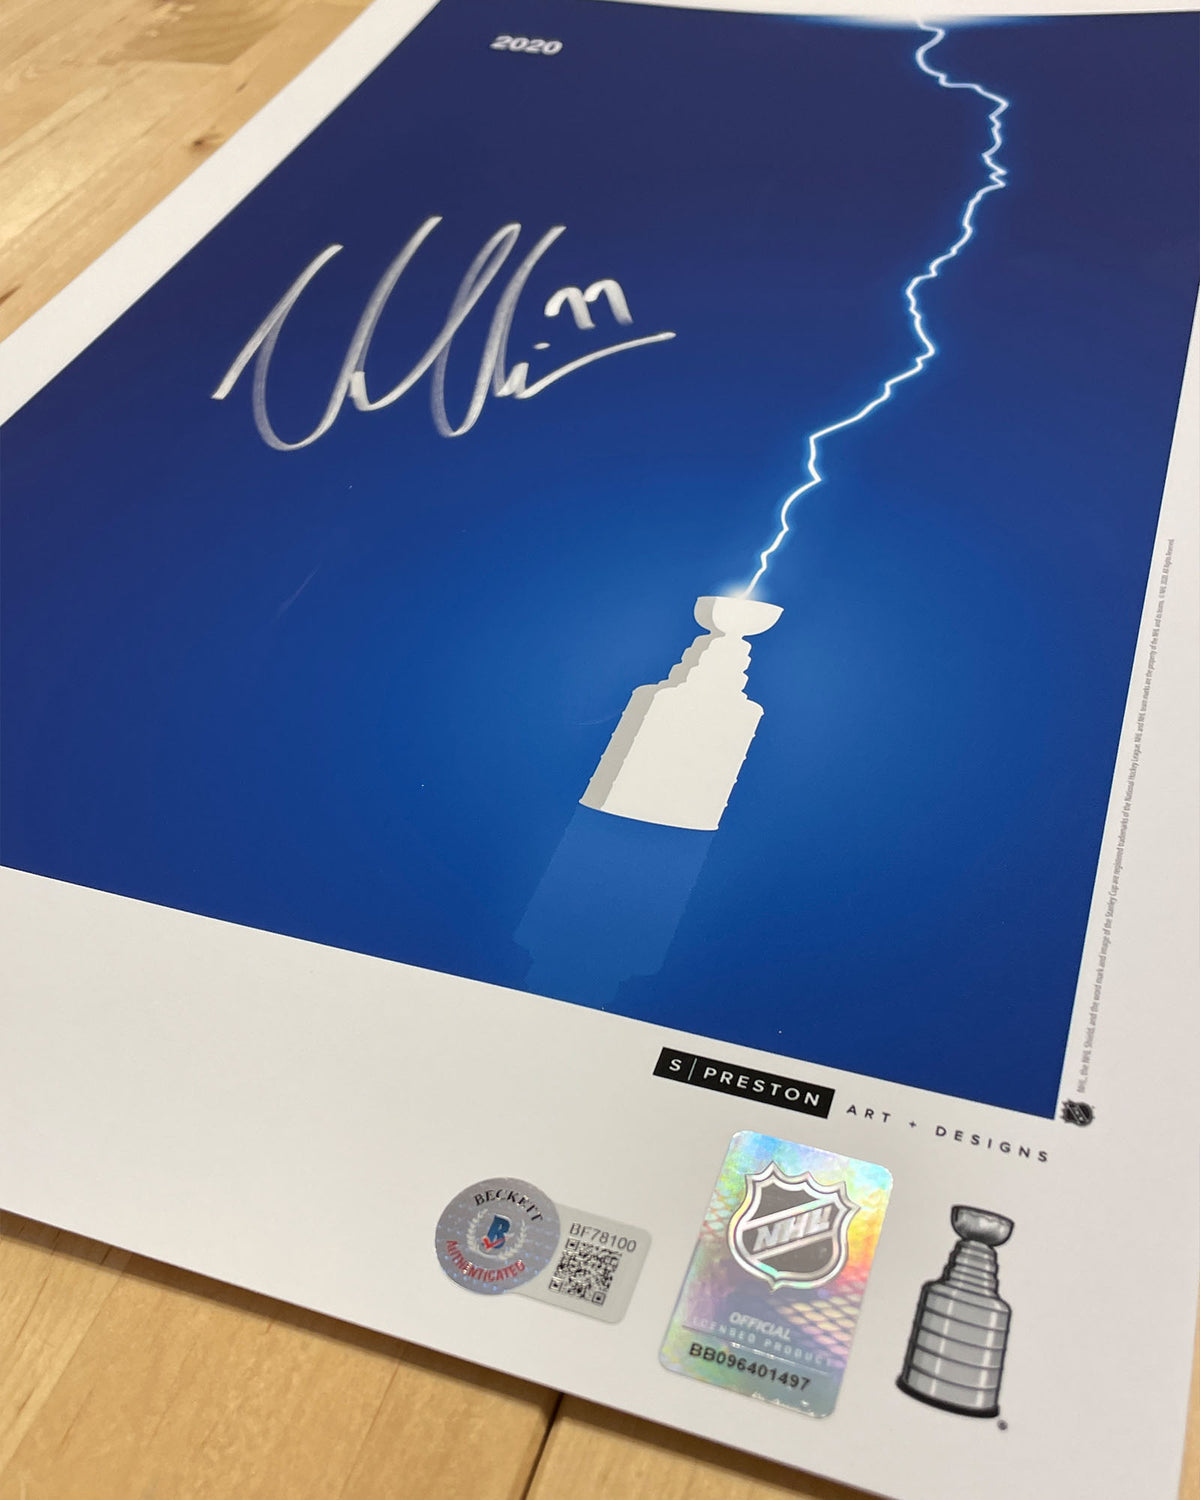 Minimalist Stanley Cup 2020 Poster Print - Victor Hedman Signed - Beckett Authenticated